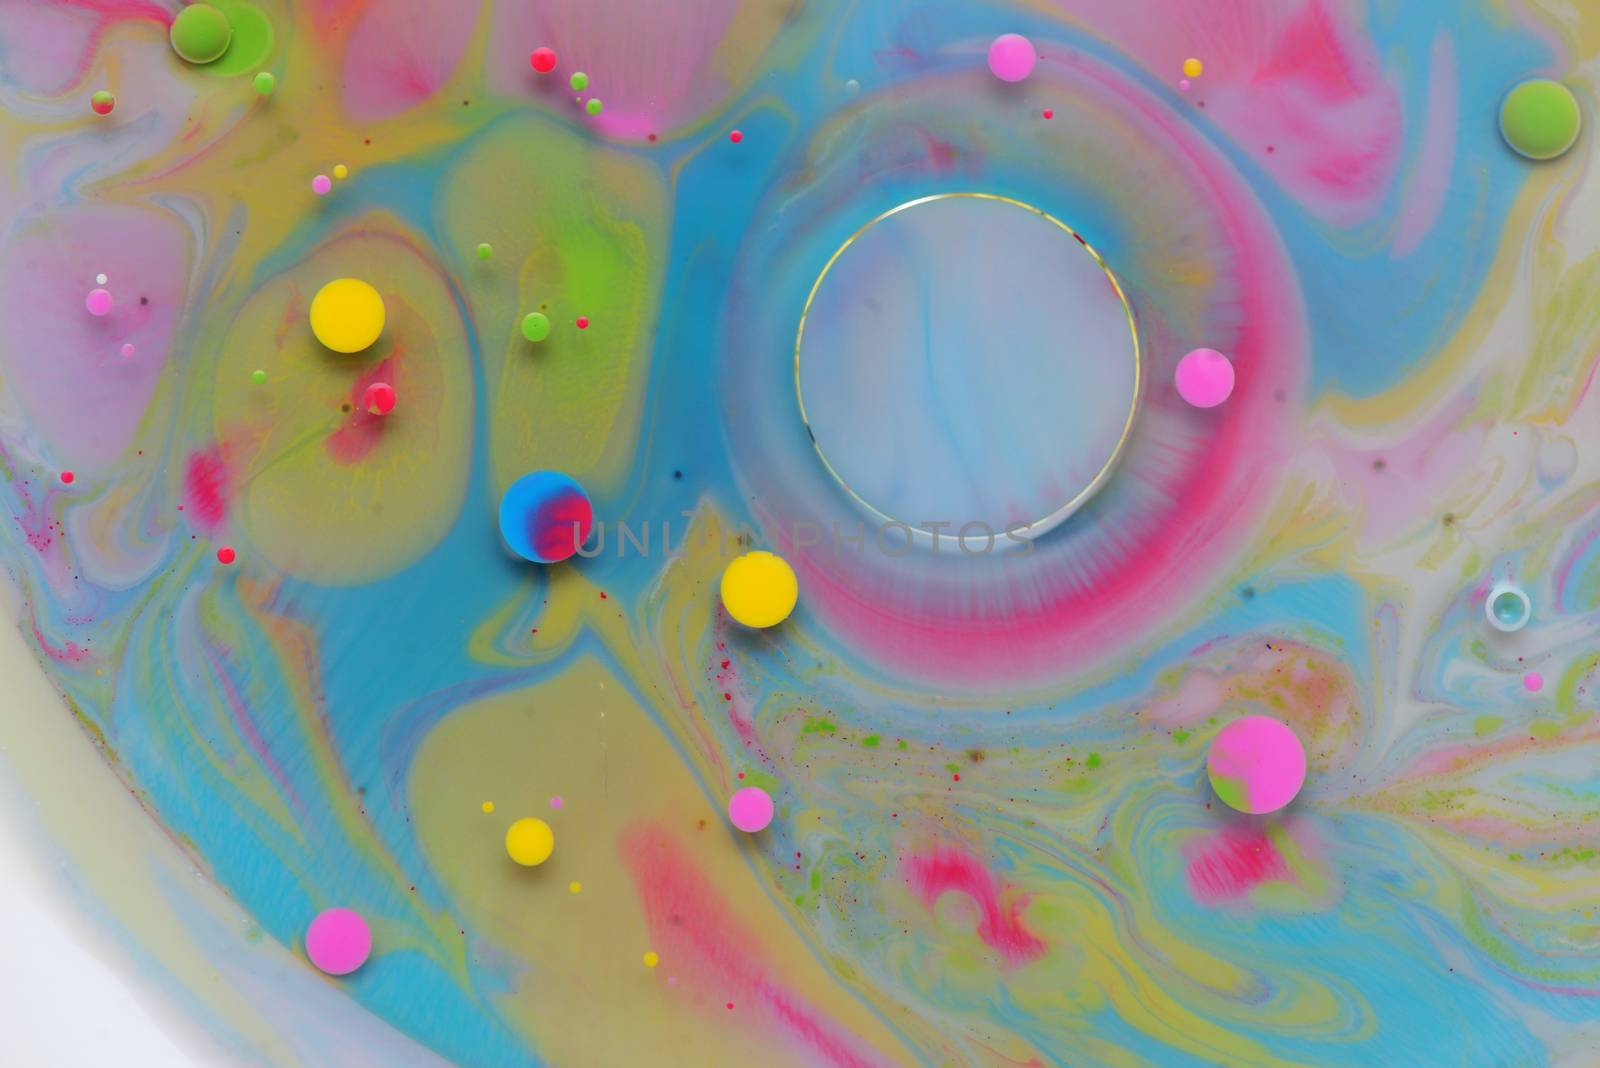 Oil, milk and water over colors